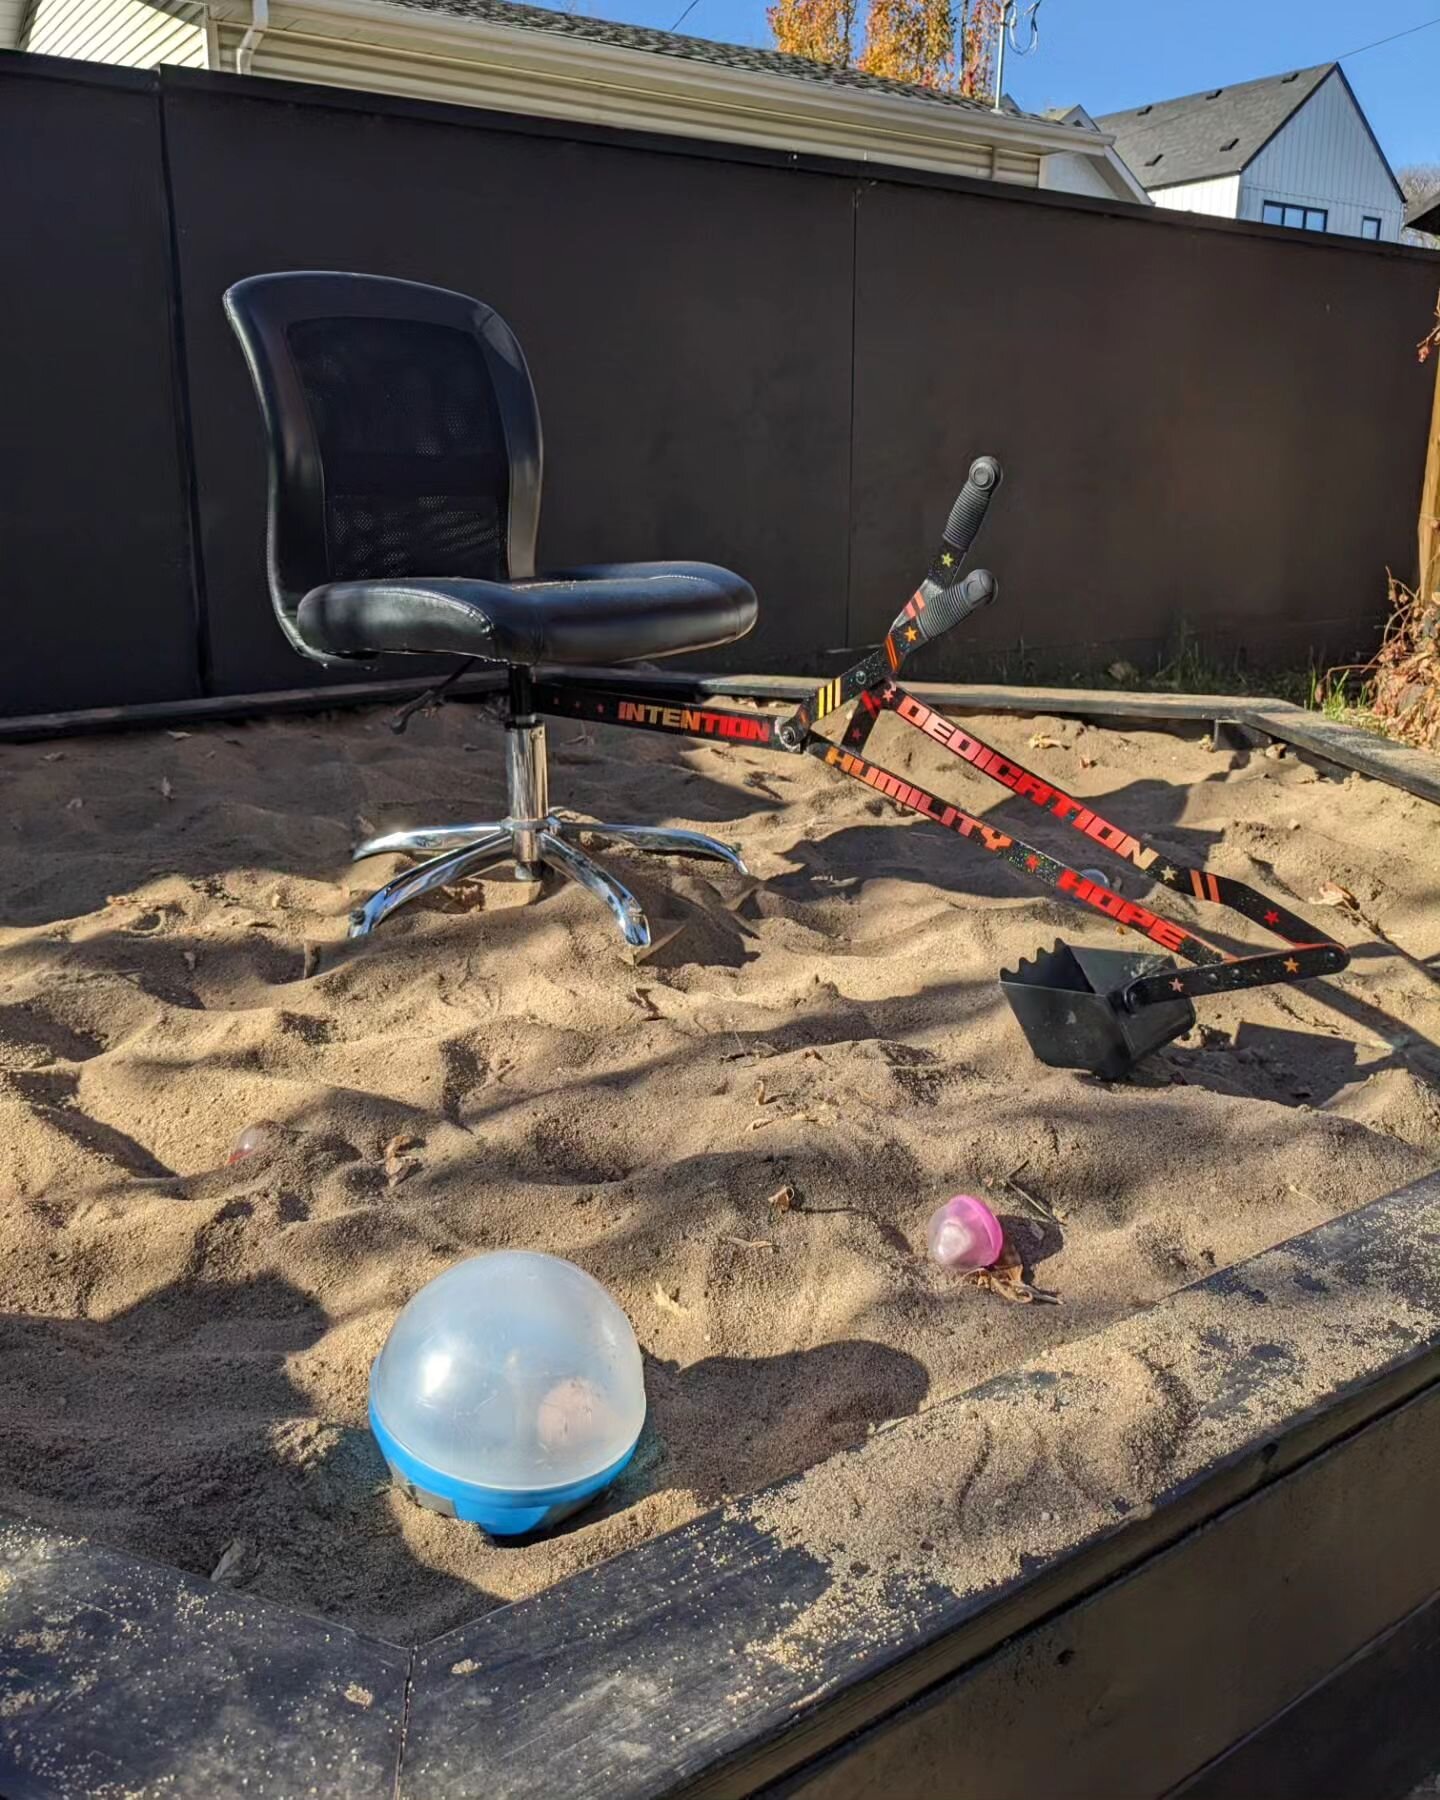 ALL WORK ALL PLAY

by Isabelle Kuzio

Various materials

All Work All Play revolves around a sandbox excavator, a toy that encourages kids to feel like grown-ups with jobs, turning the laborious things adults do into fun. This project transforms this